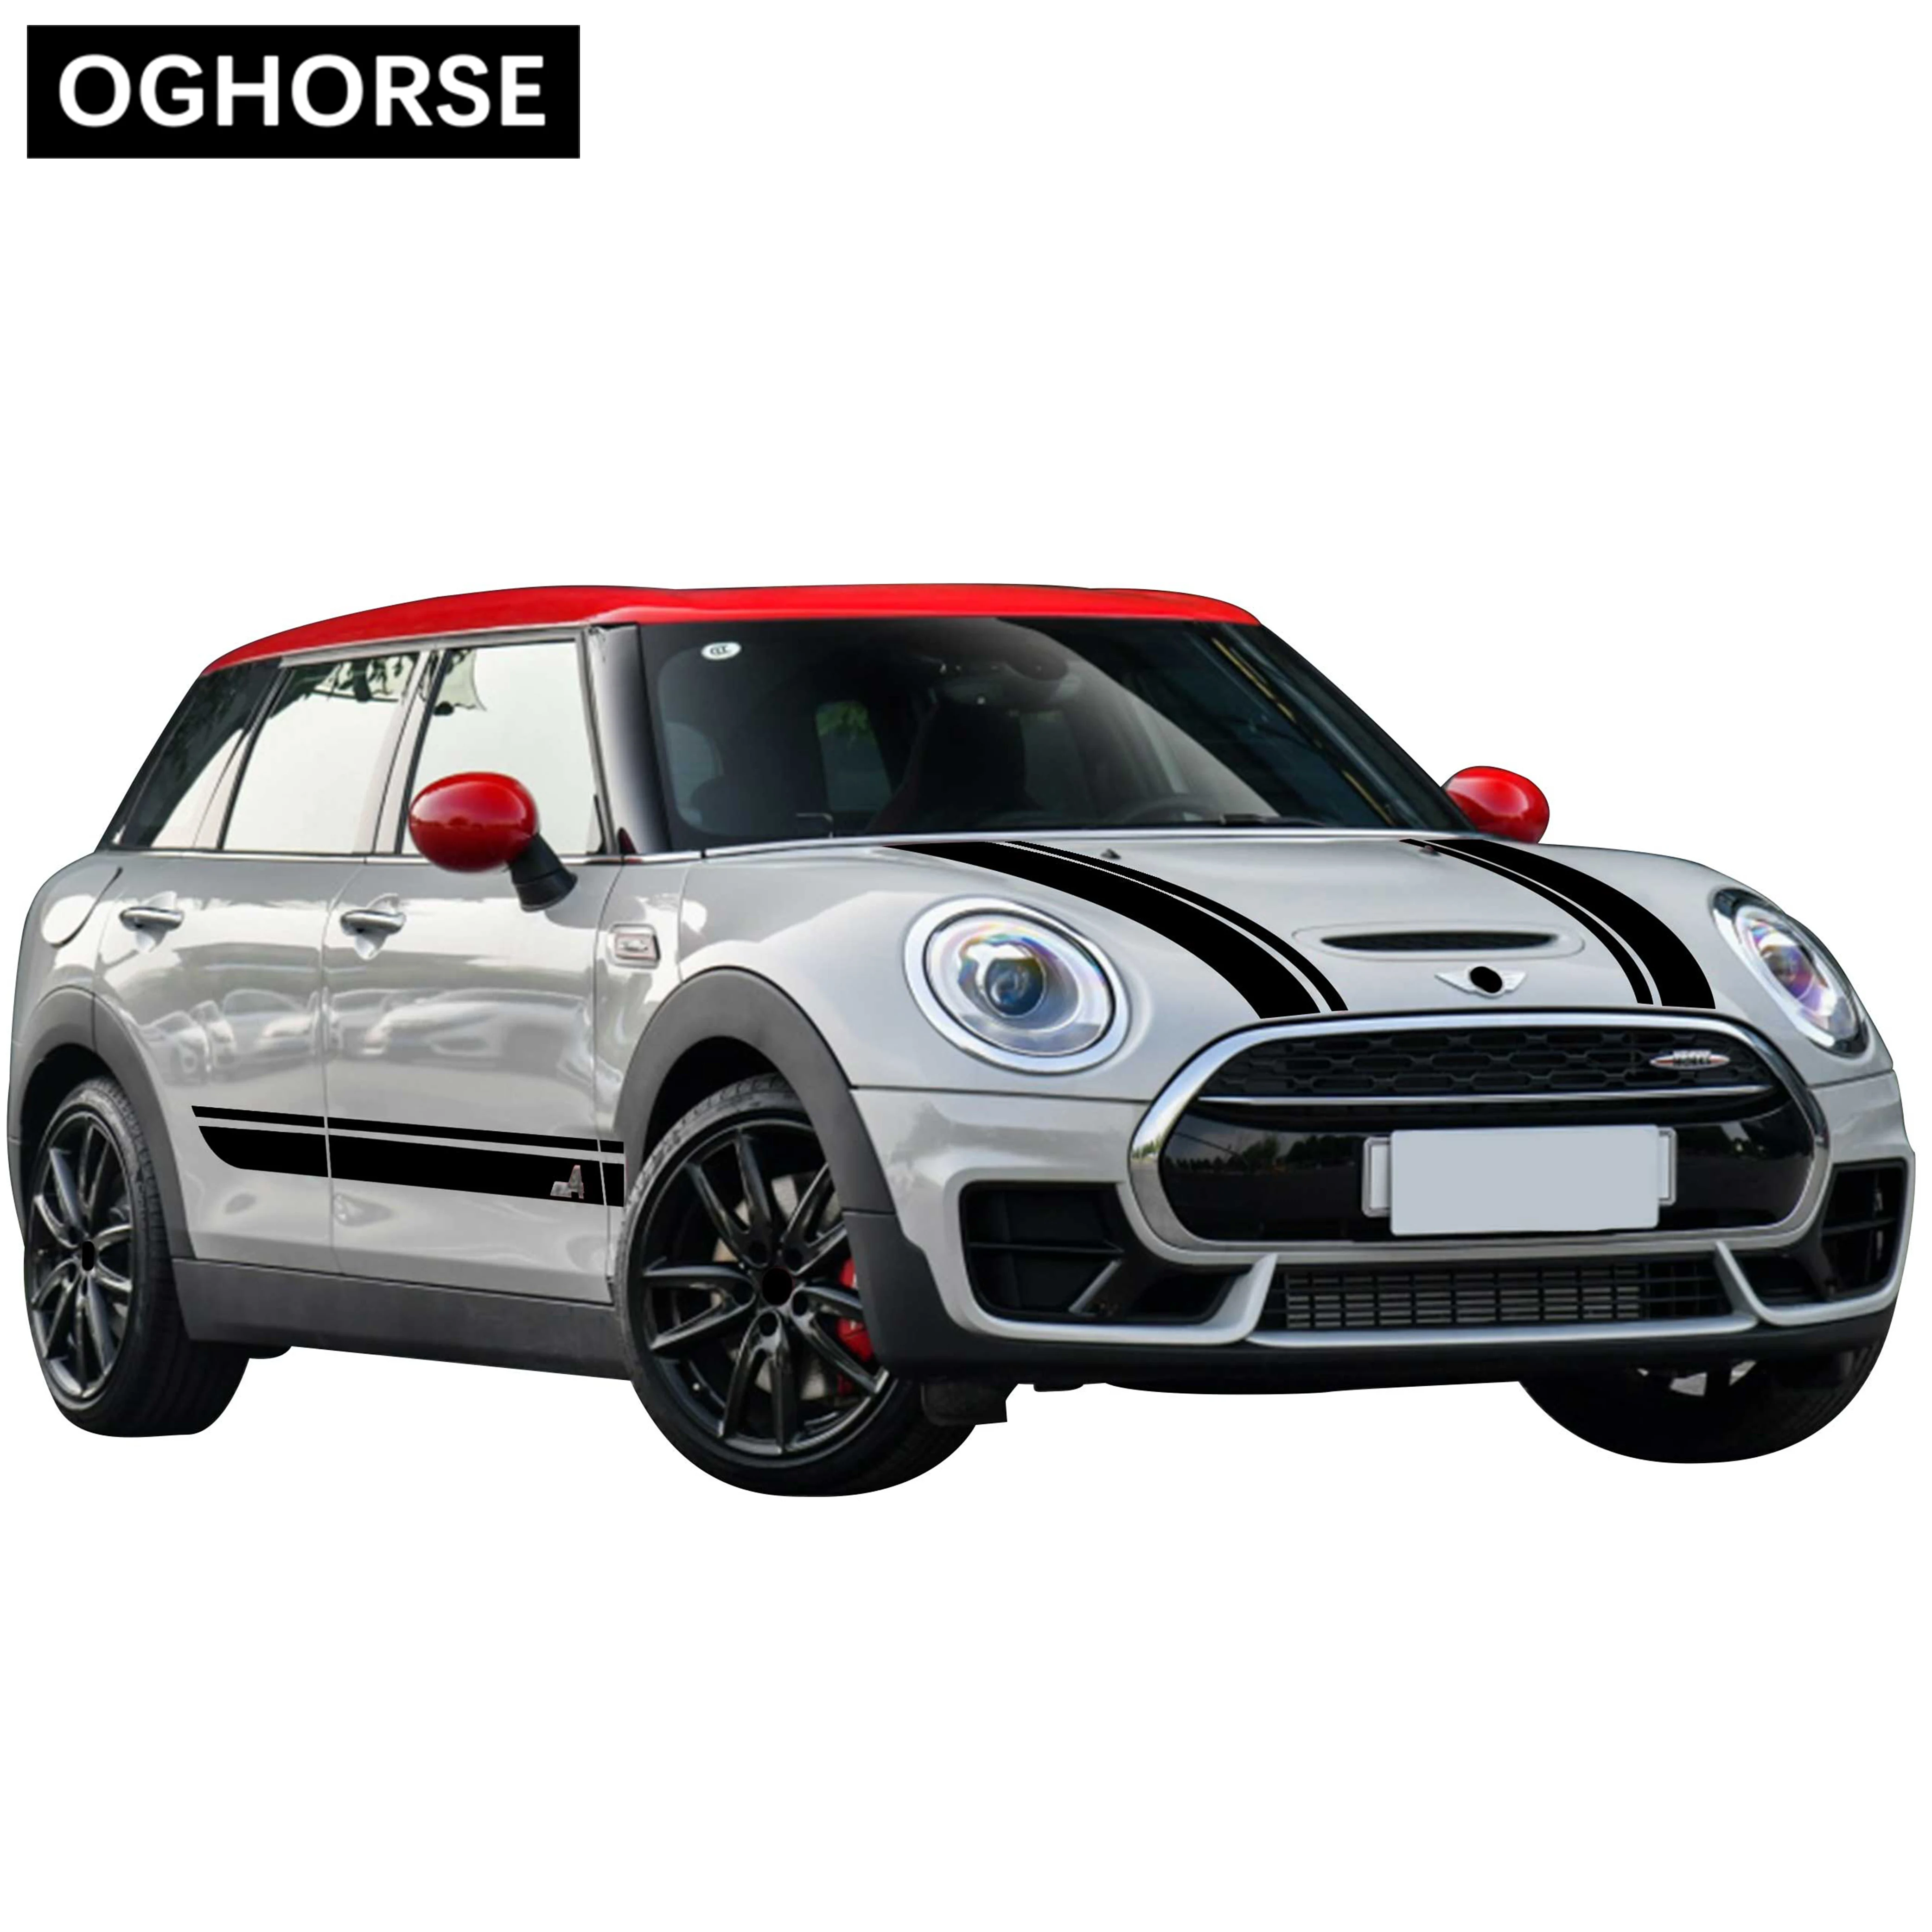 Car Hood Bonnet Racing Stripes Engine Cover Trunk Rear Side Stripes Sticker Body Kit Decal For MINI JCW Clubman F54 Accessories